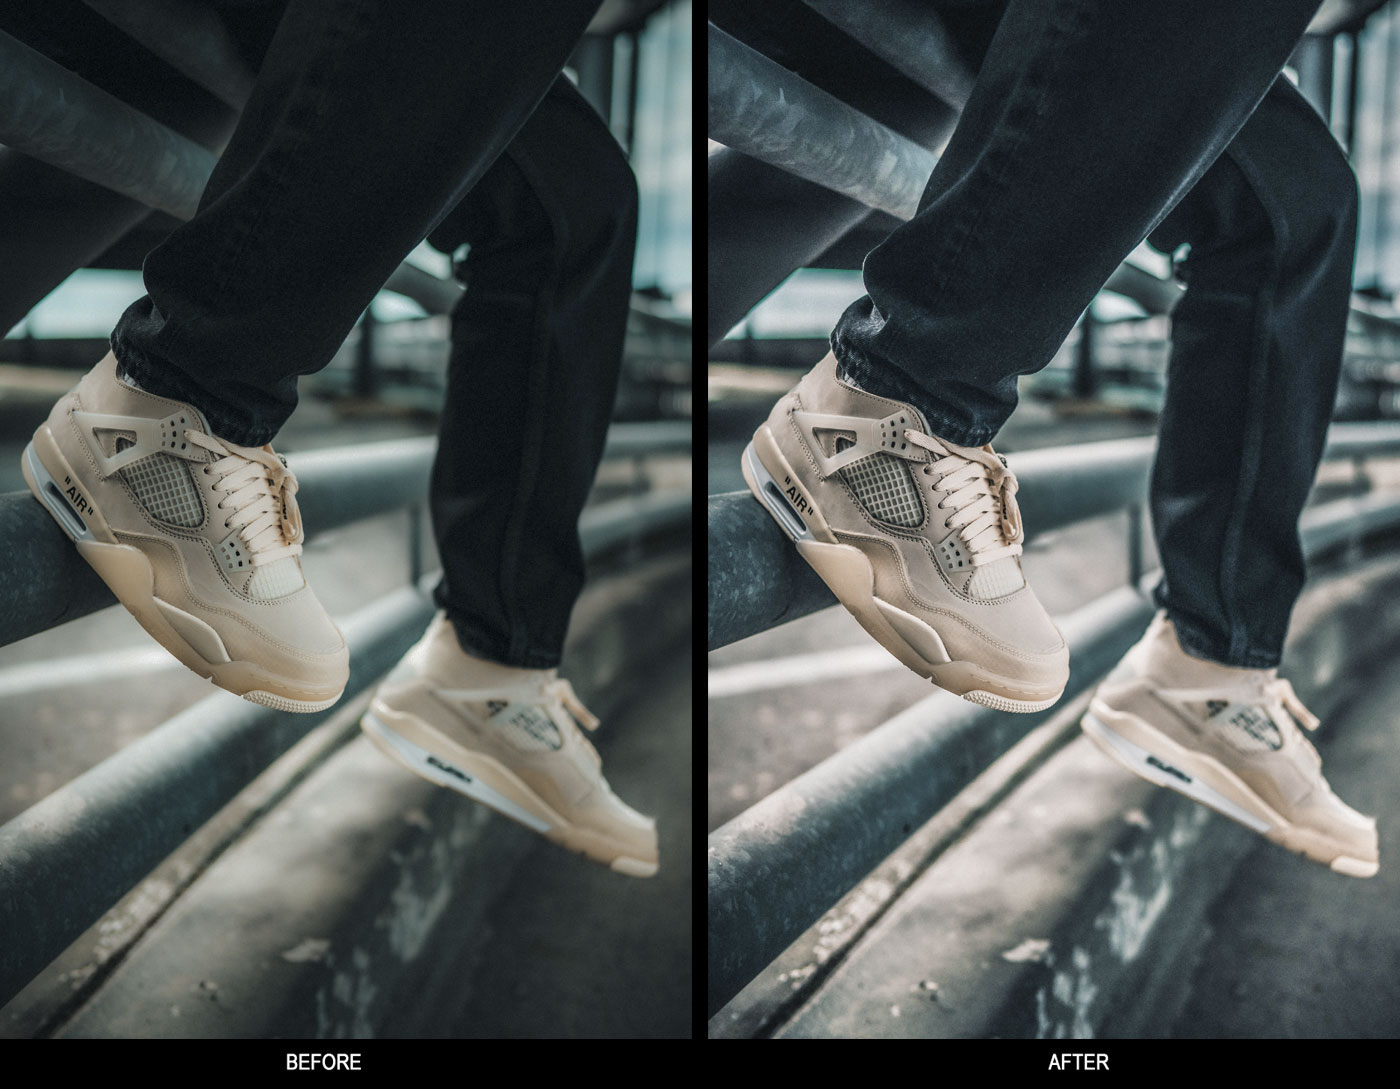 Hdr Pro Presets Examples 1